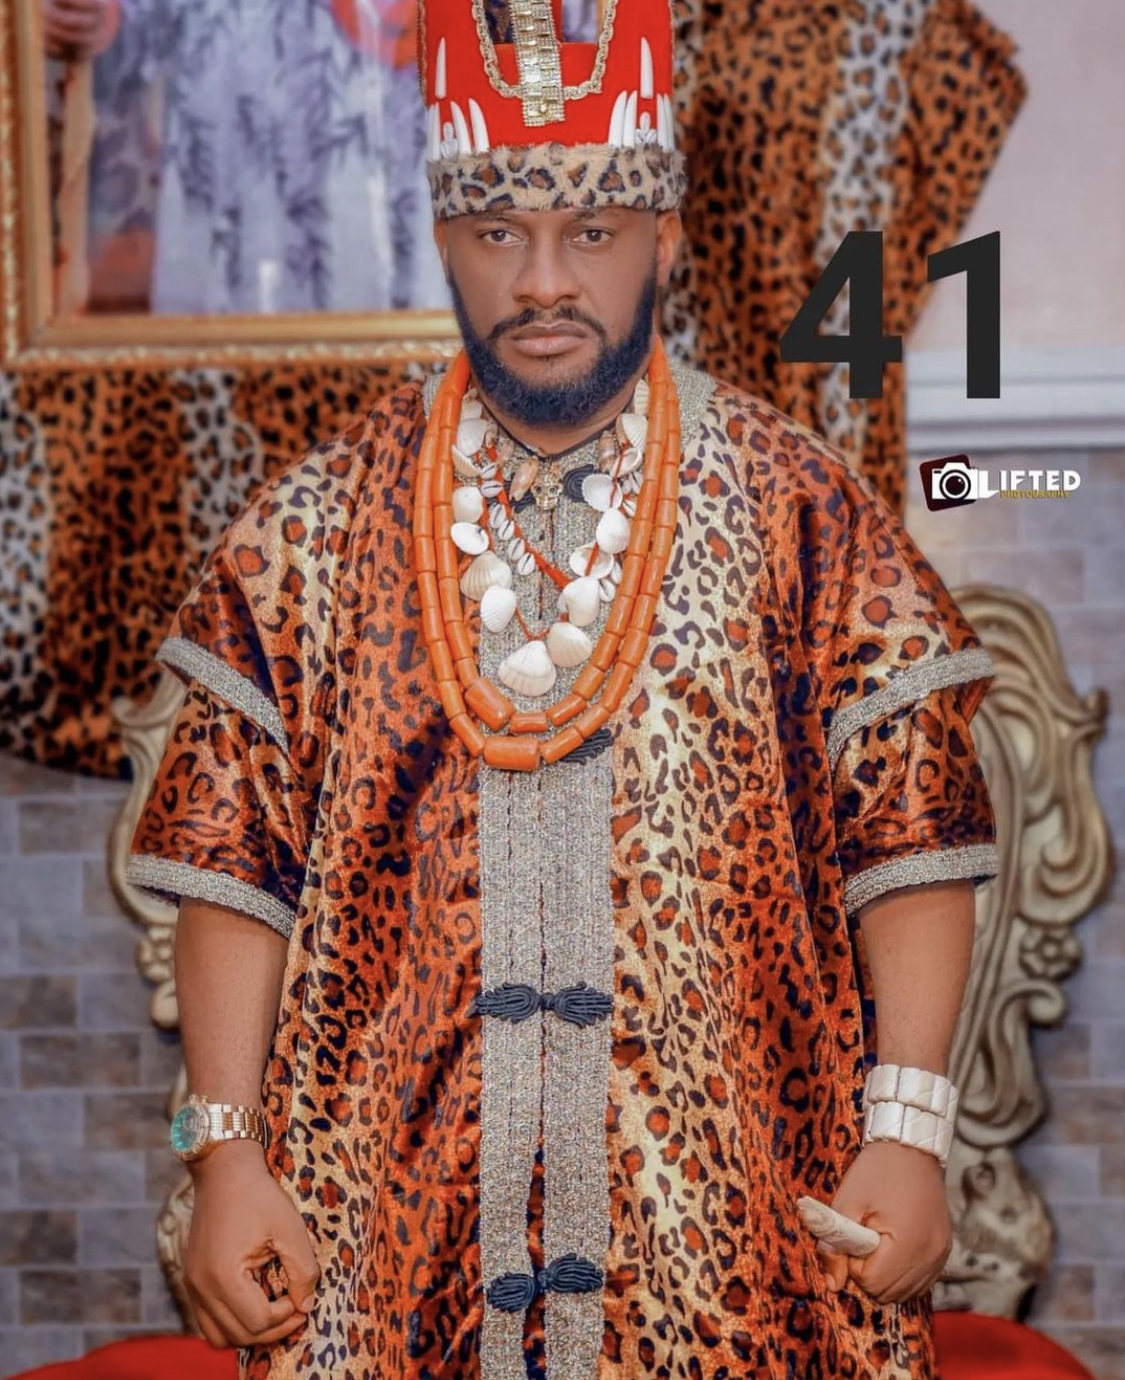 My King - Actor Yul Edochie’s 2nd wife Judy Austin celebrates his birthday as 1st wife May Snubs him [photos]